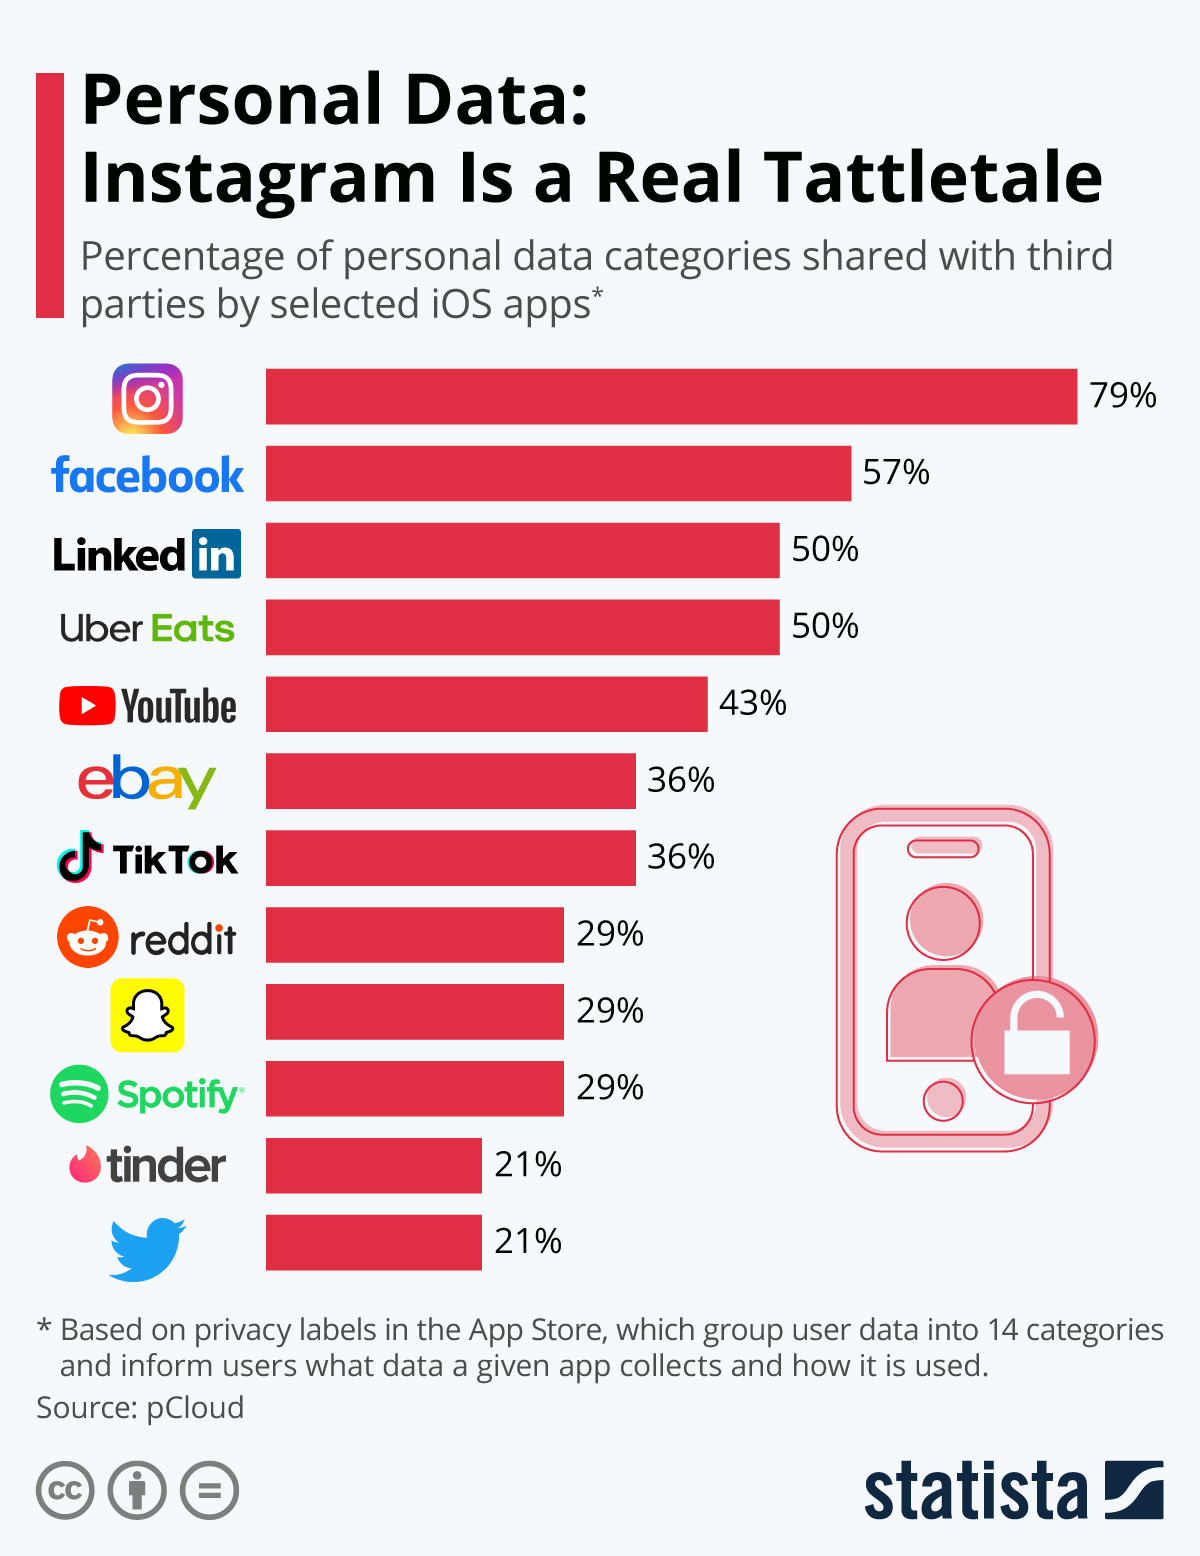 Instagram 'top' of list of apps in sharing 3rd-party data